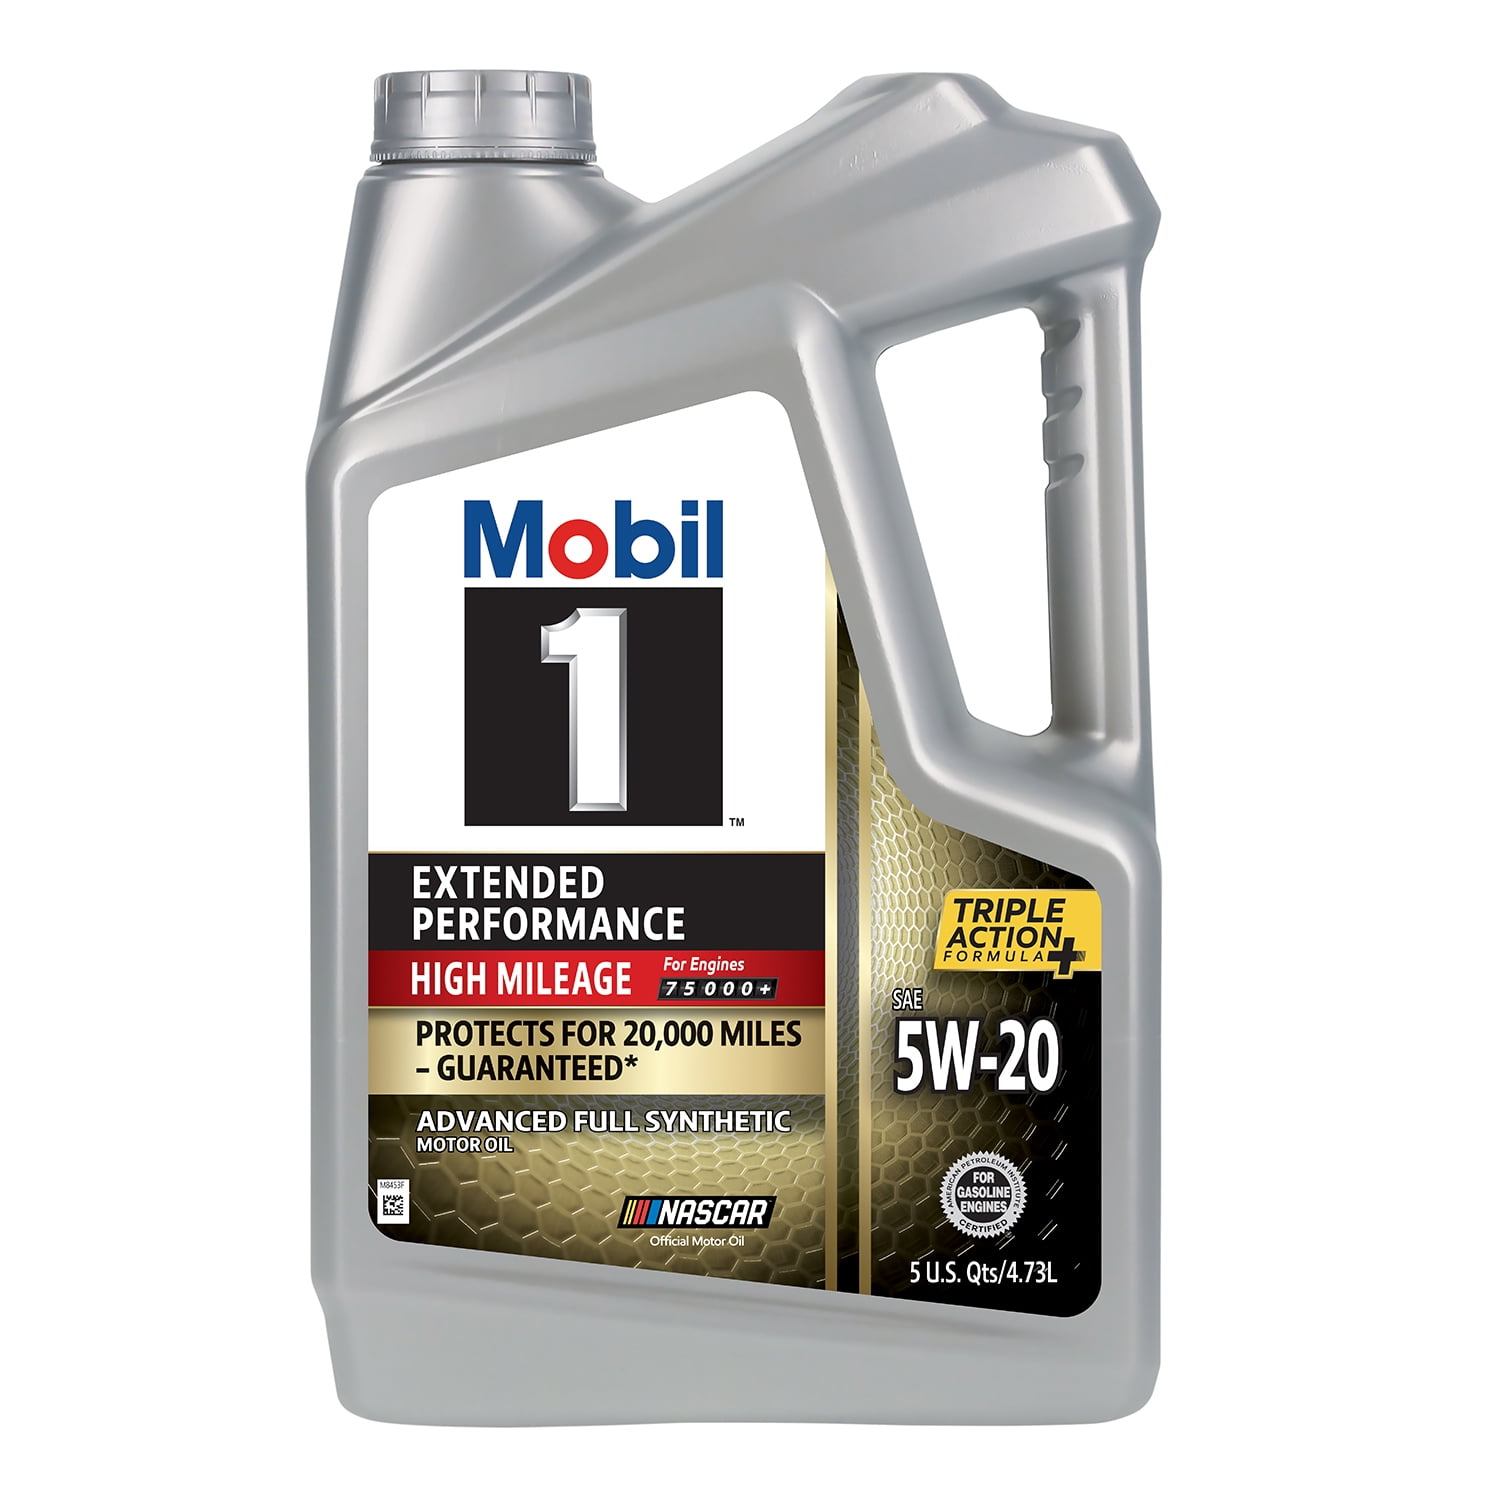 Mobil 1 Extended Performance High Mileage Full Synthetic Motor Oil 5W-20, 5 qt (3 Pack) - 1